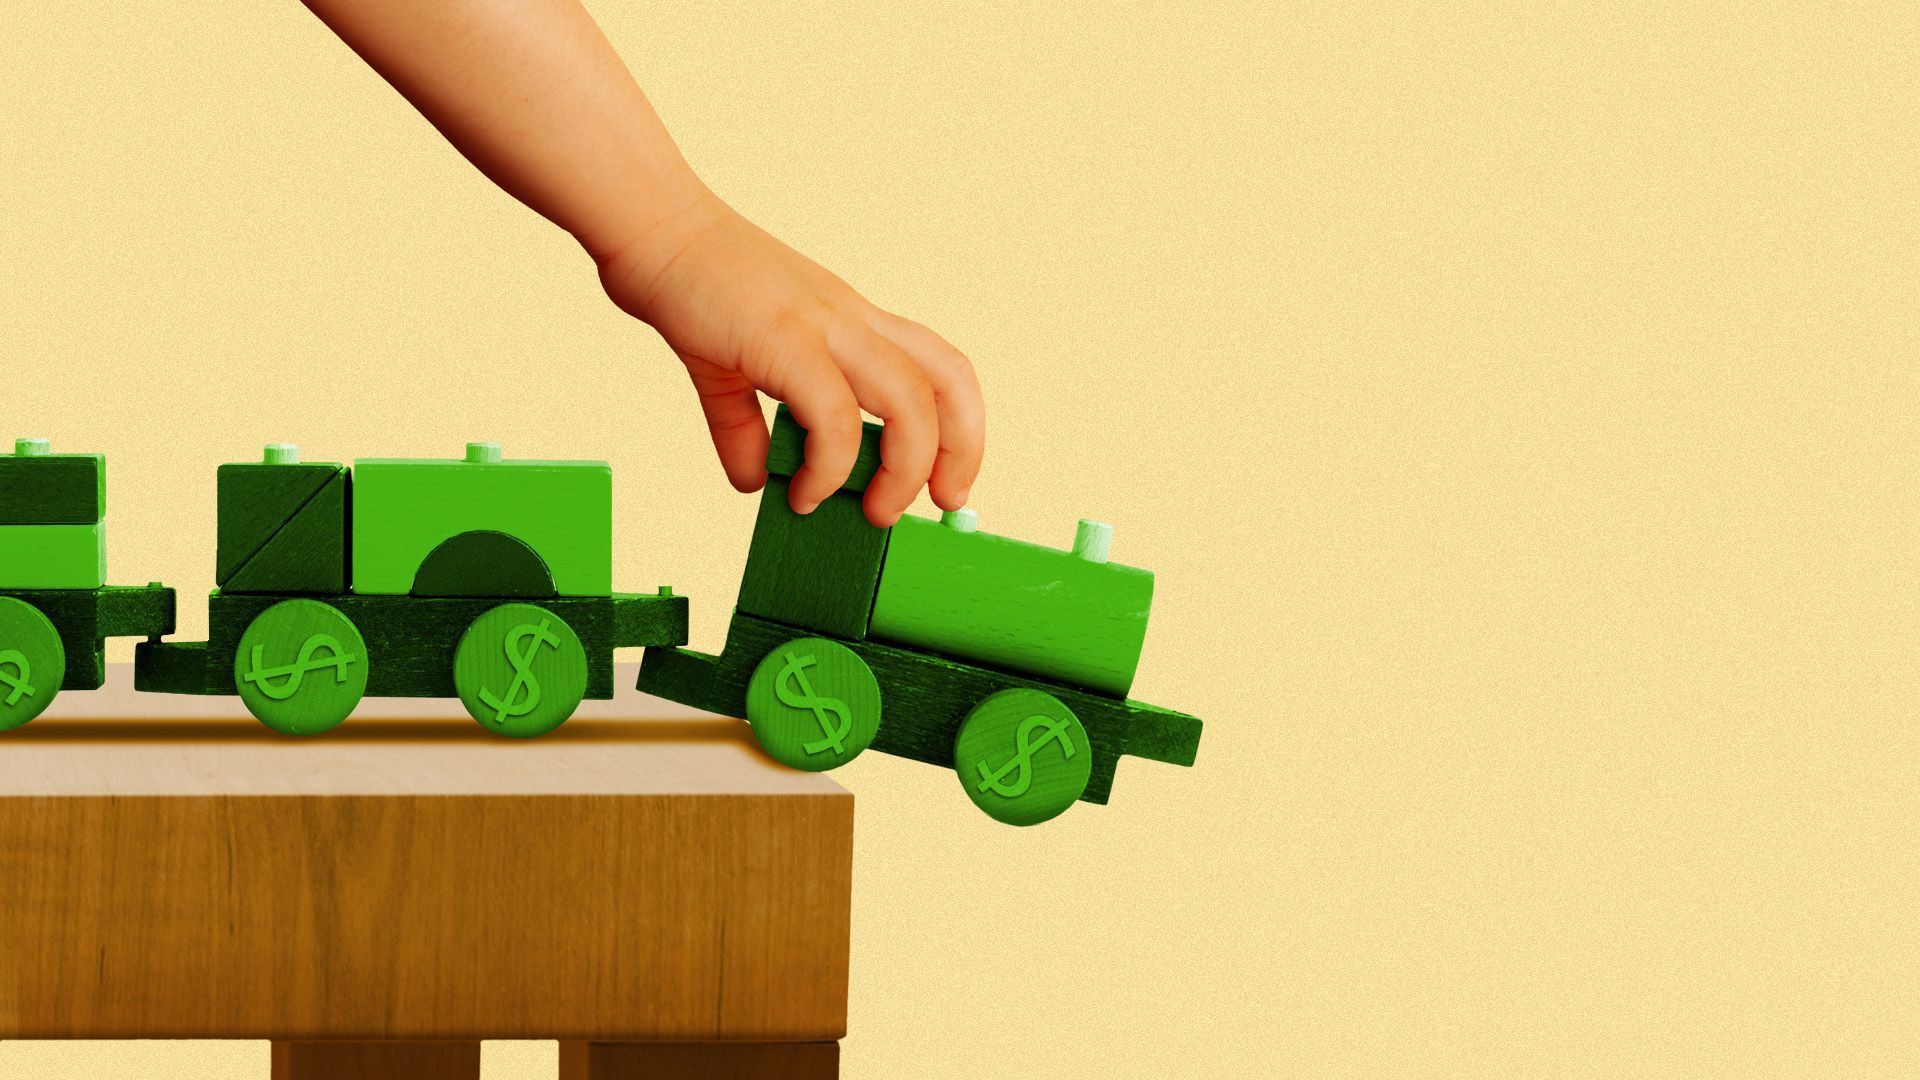 Illustration of a child guiding a green toy train with dollar sign wheels off the edge of a table